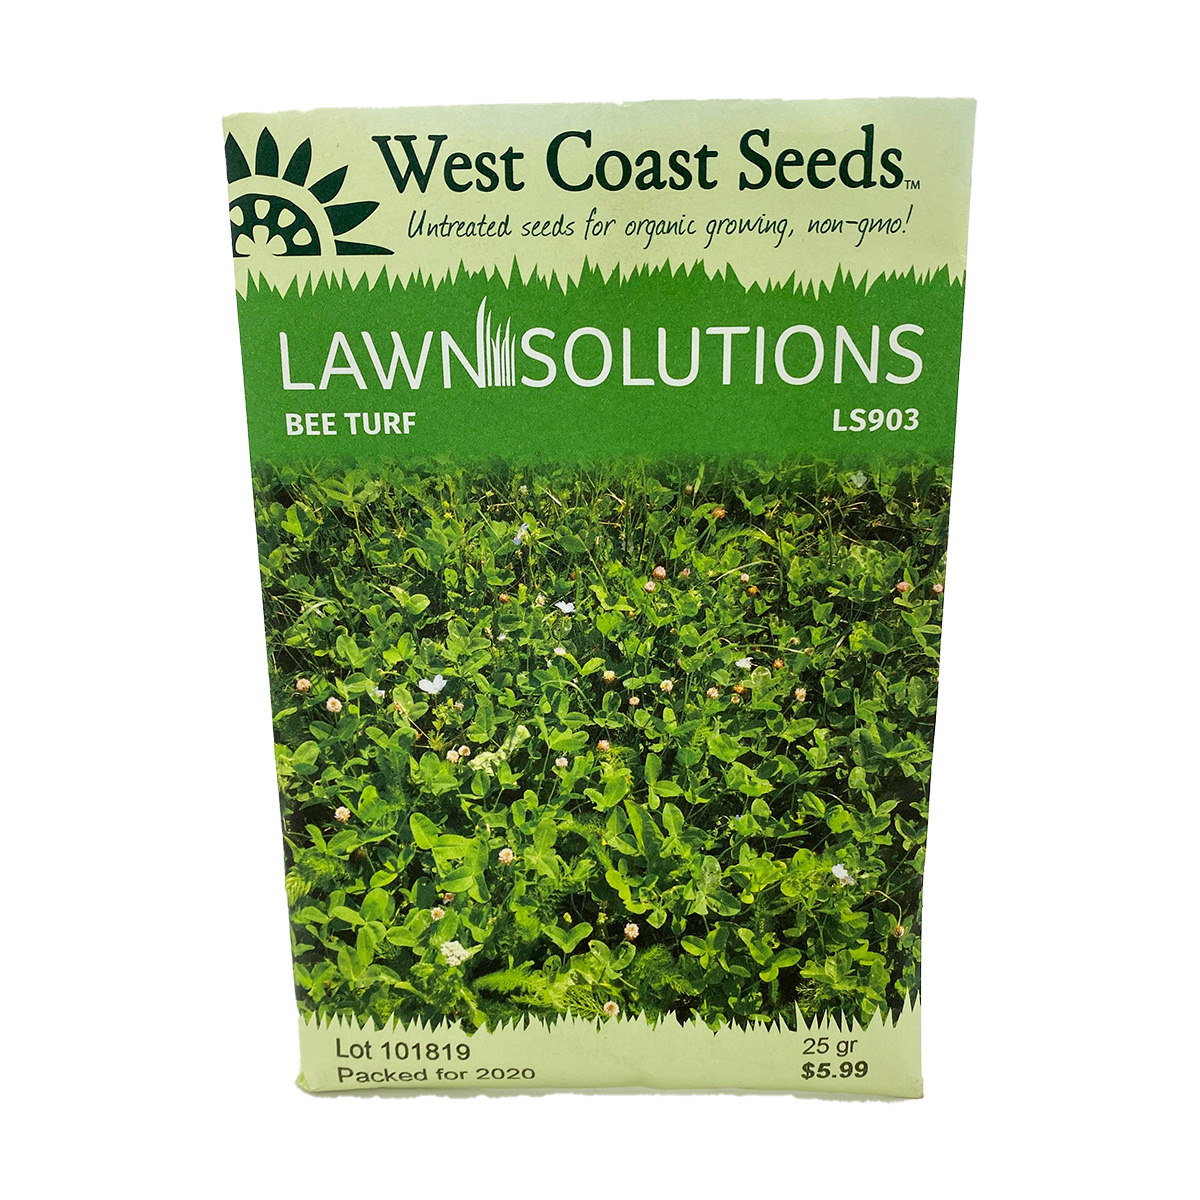 Lawn Solutions Bee Turf 25g